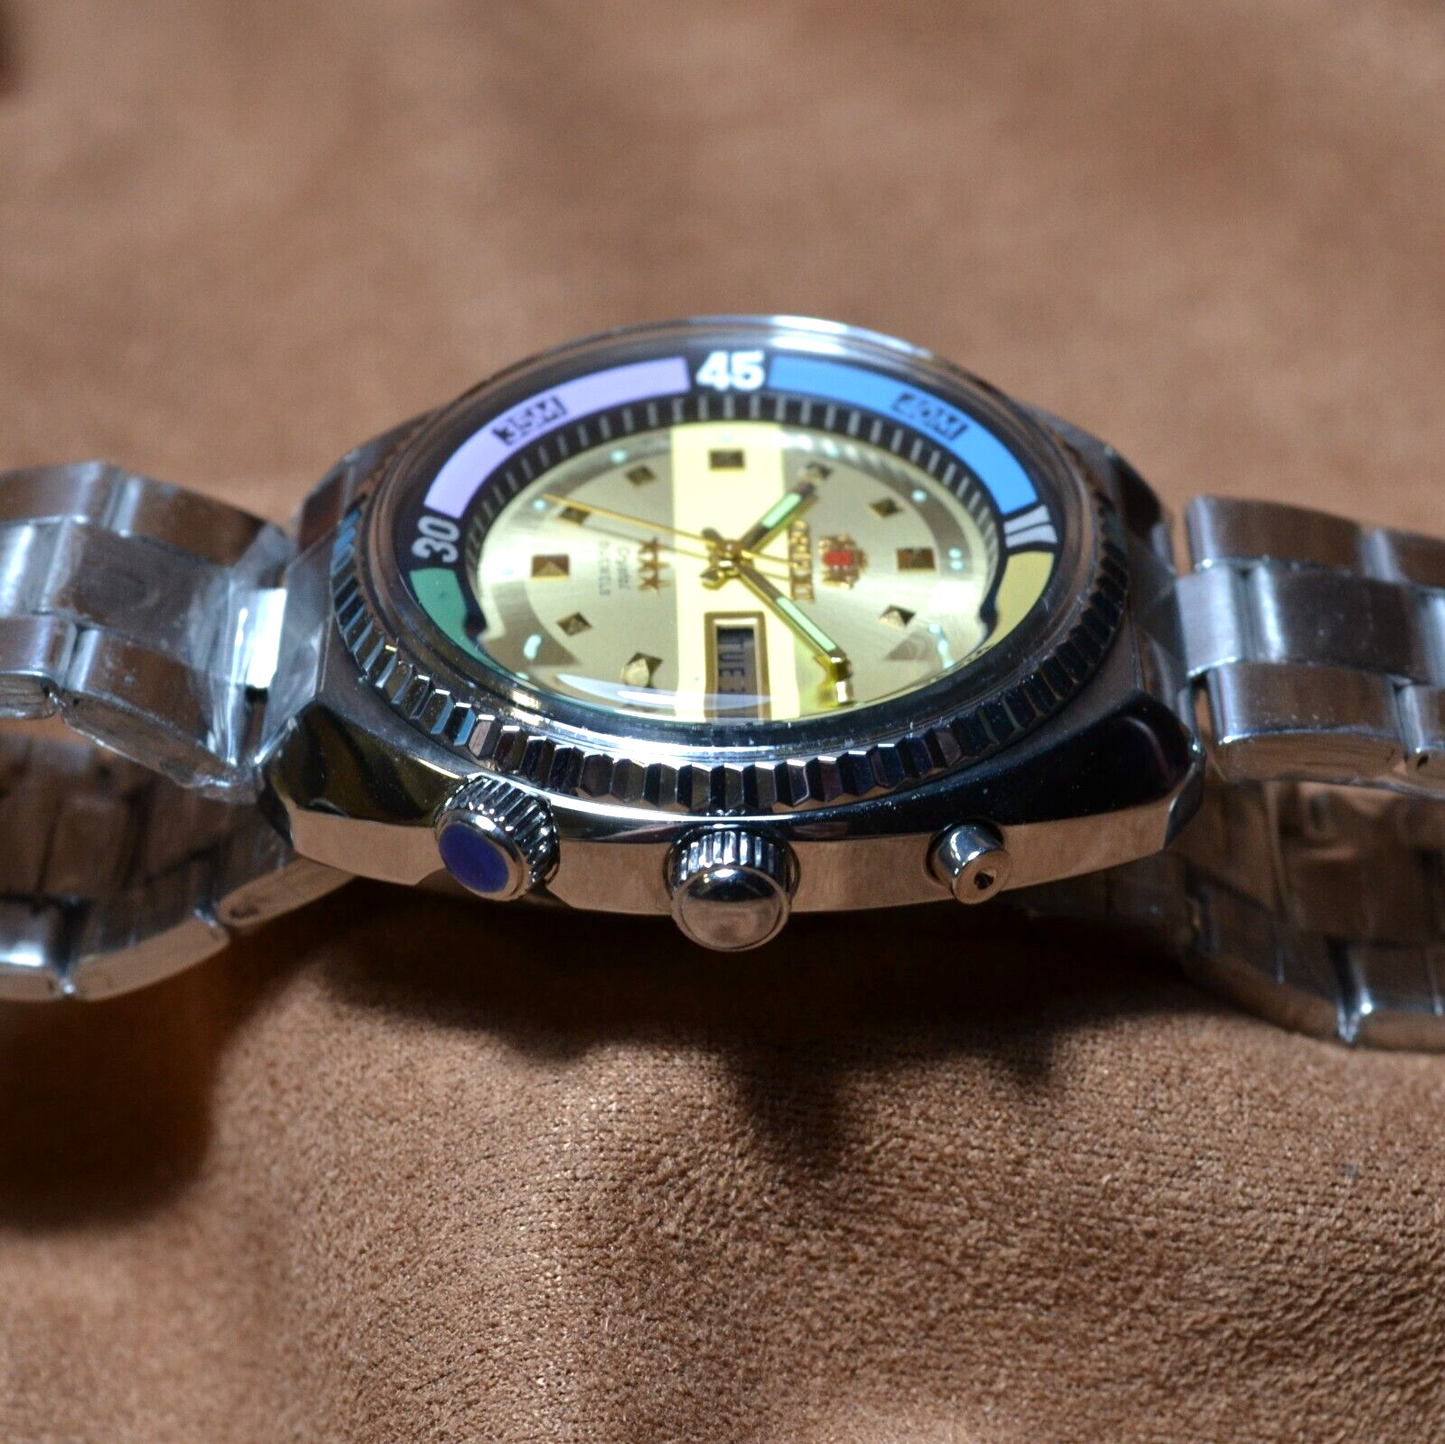 Watch Orient KING DIVER Automatic watch KD 21 JEWELS Original Japan Gold Dial